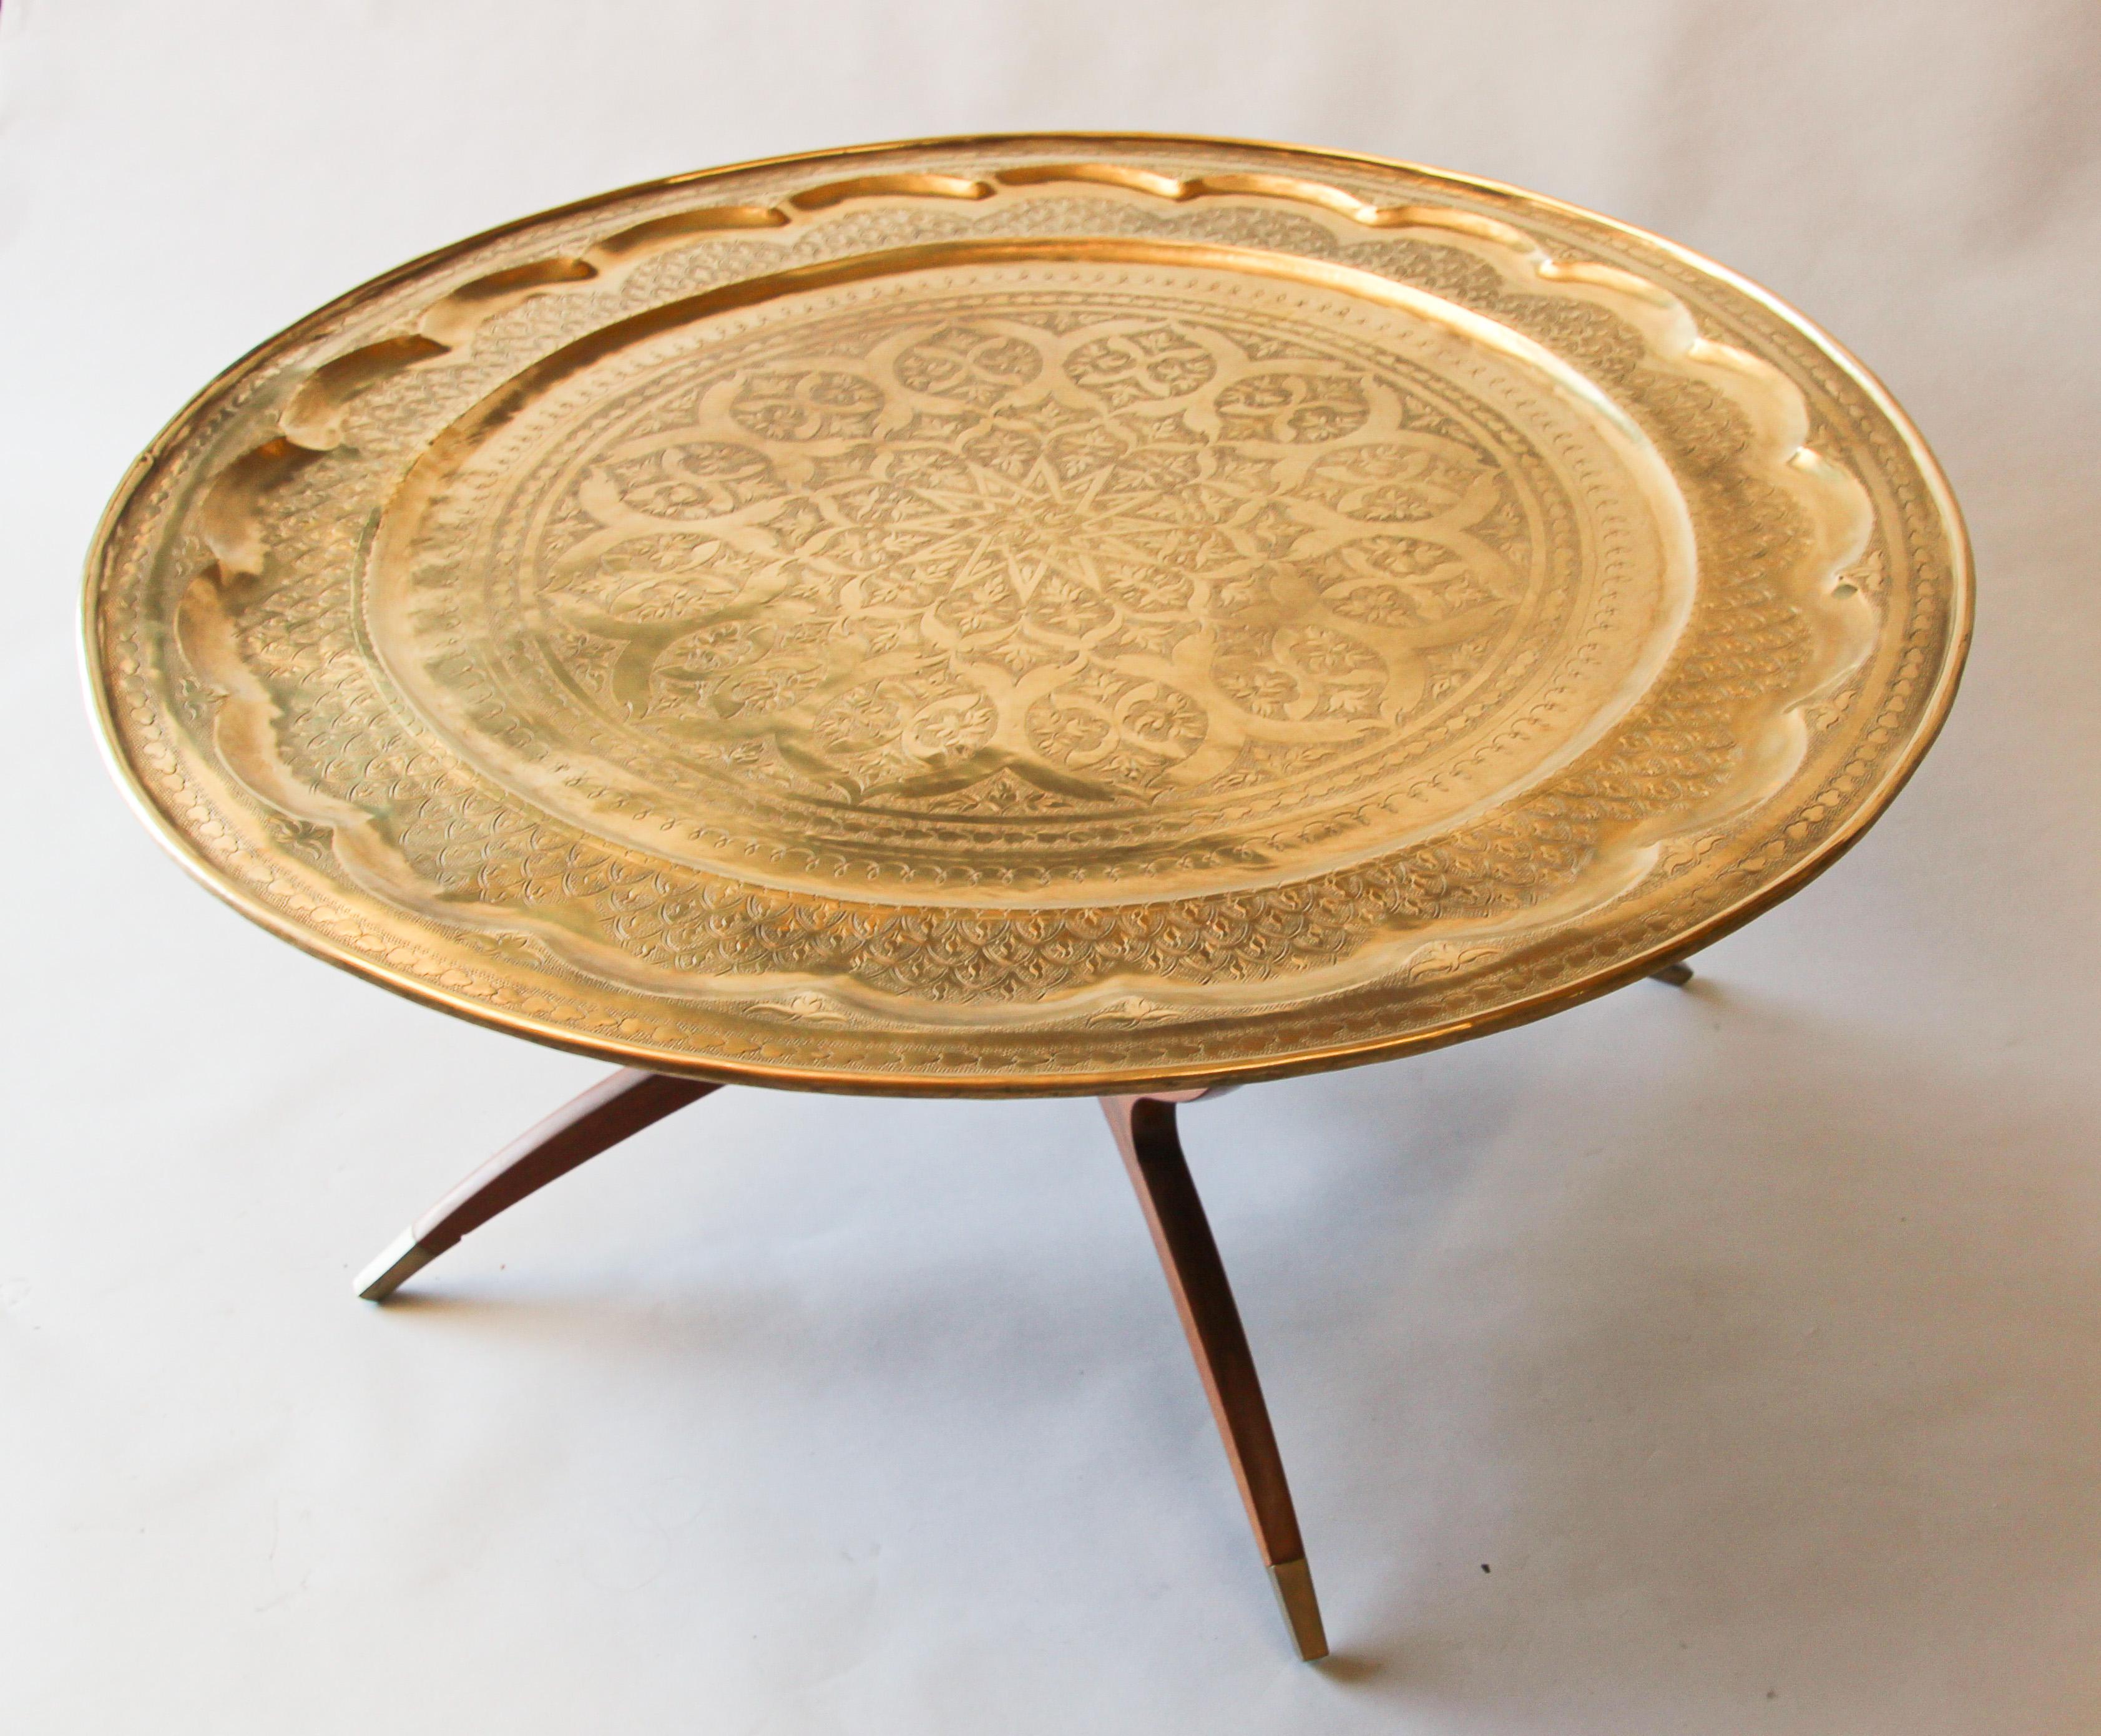 Engraved and embossed large 38.5 inches round midcentury Anglo-Indian brass tray table.
Polished brass Moroccan tray, very good condition, standing on folding wood base with six legs.
Large metal hand-hammered brass tray coffee table.
Middle